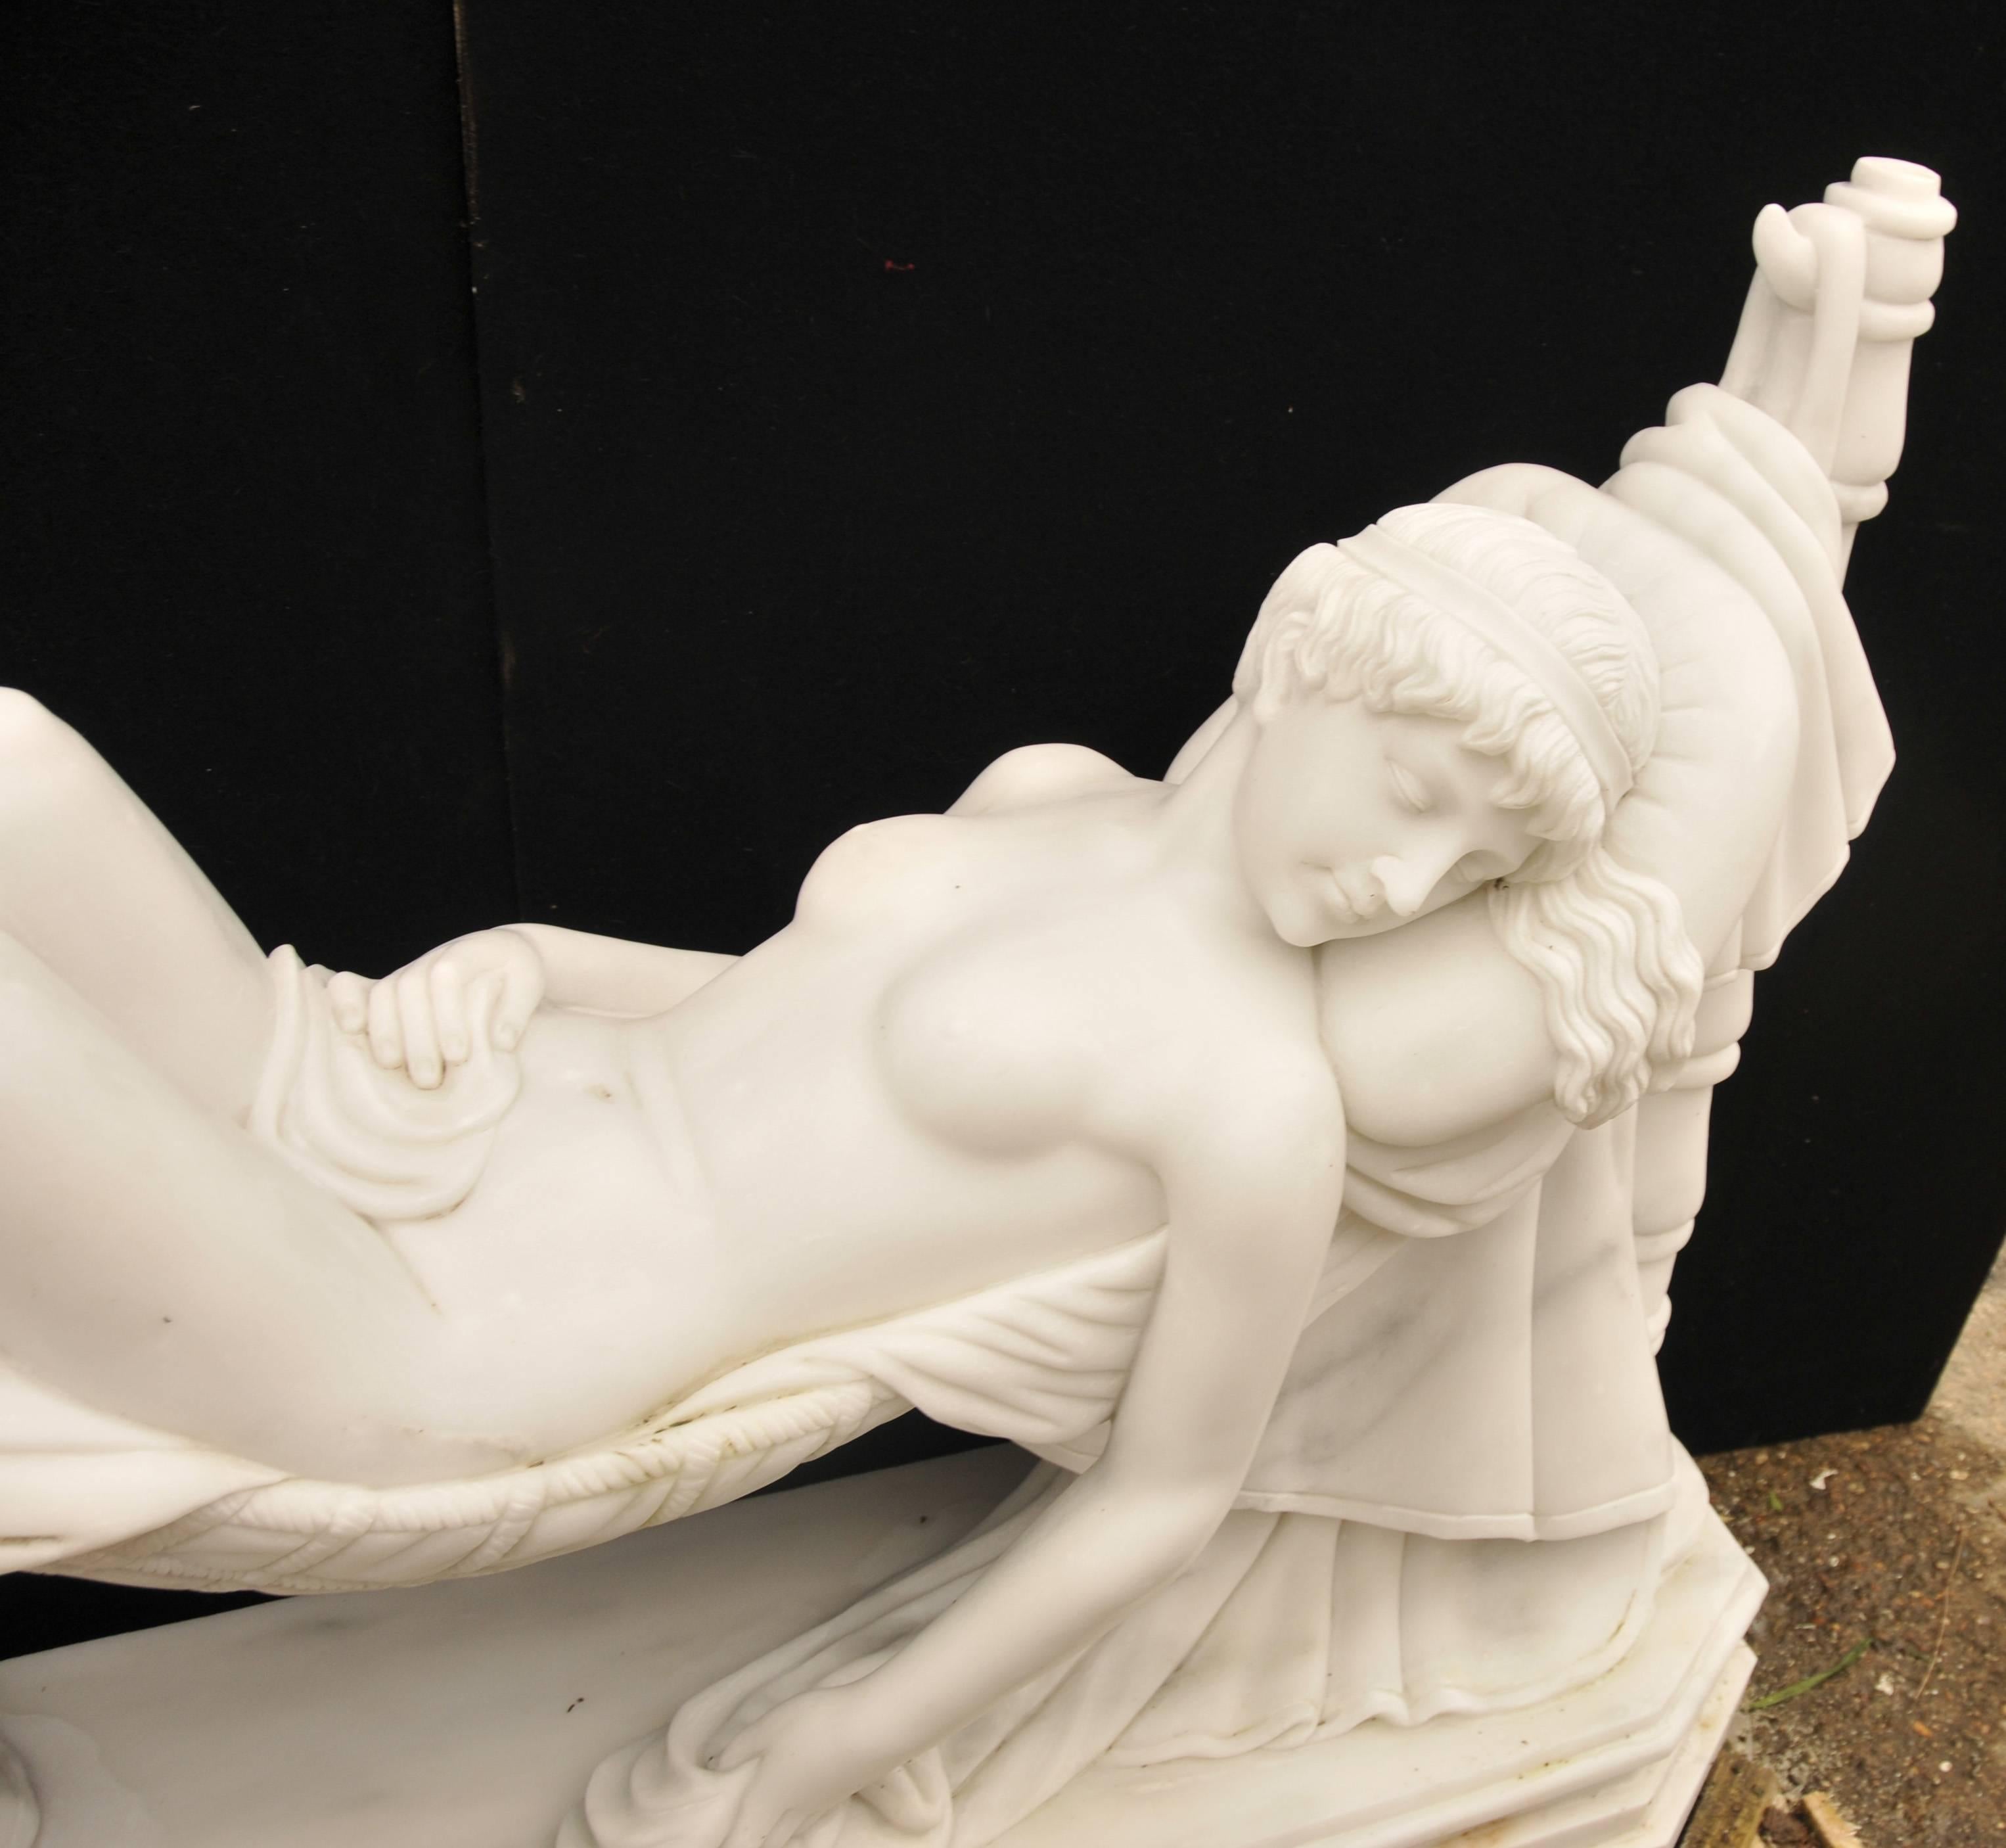 Gorgeous hand-carved Italian marble statue depicting a beautiful female nude asleep in a hammock.
Piece originally by Antonio Frilli from the late 19th Century in Italy and this is a copy.
Stunning work of beauty - over four feet long so